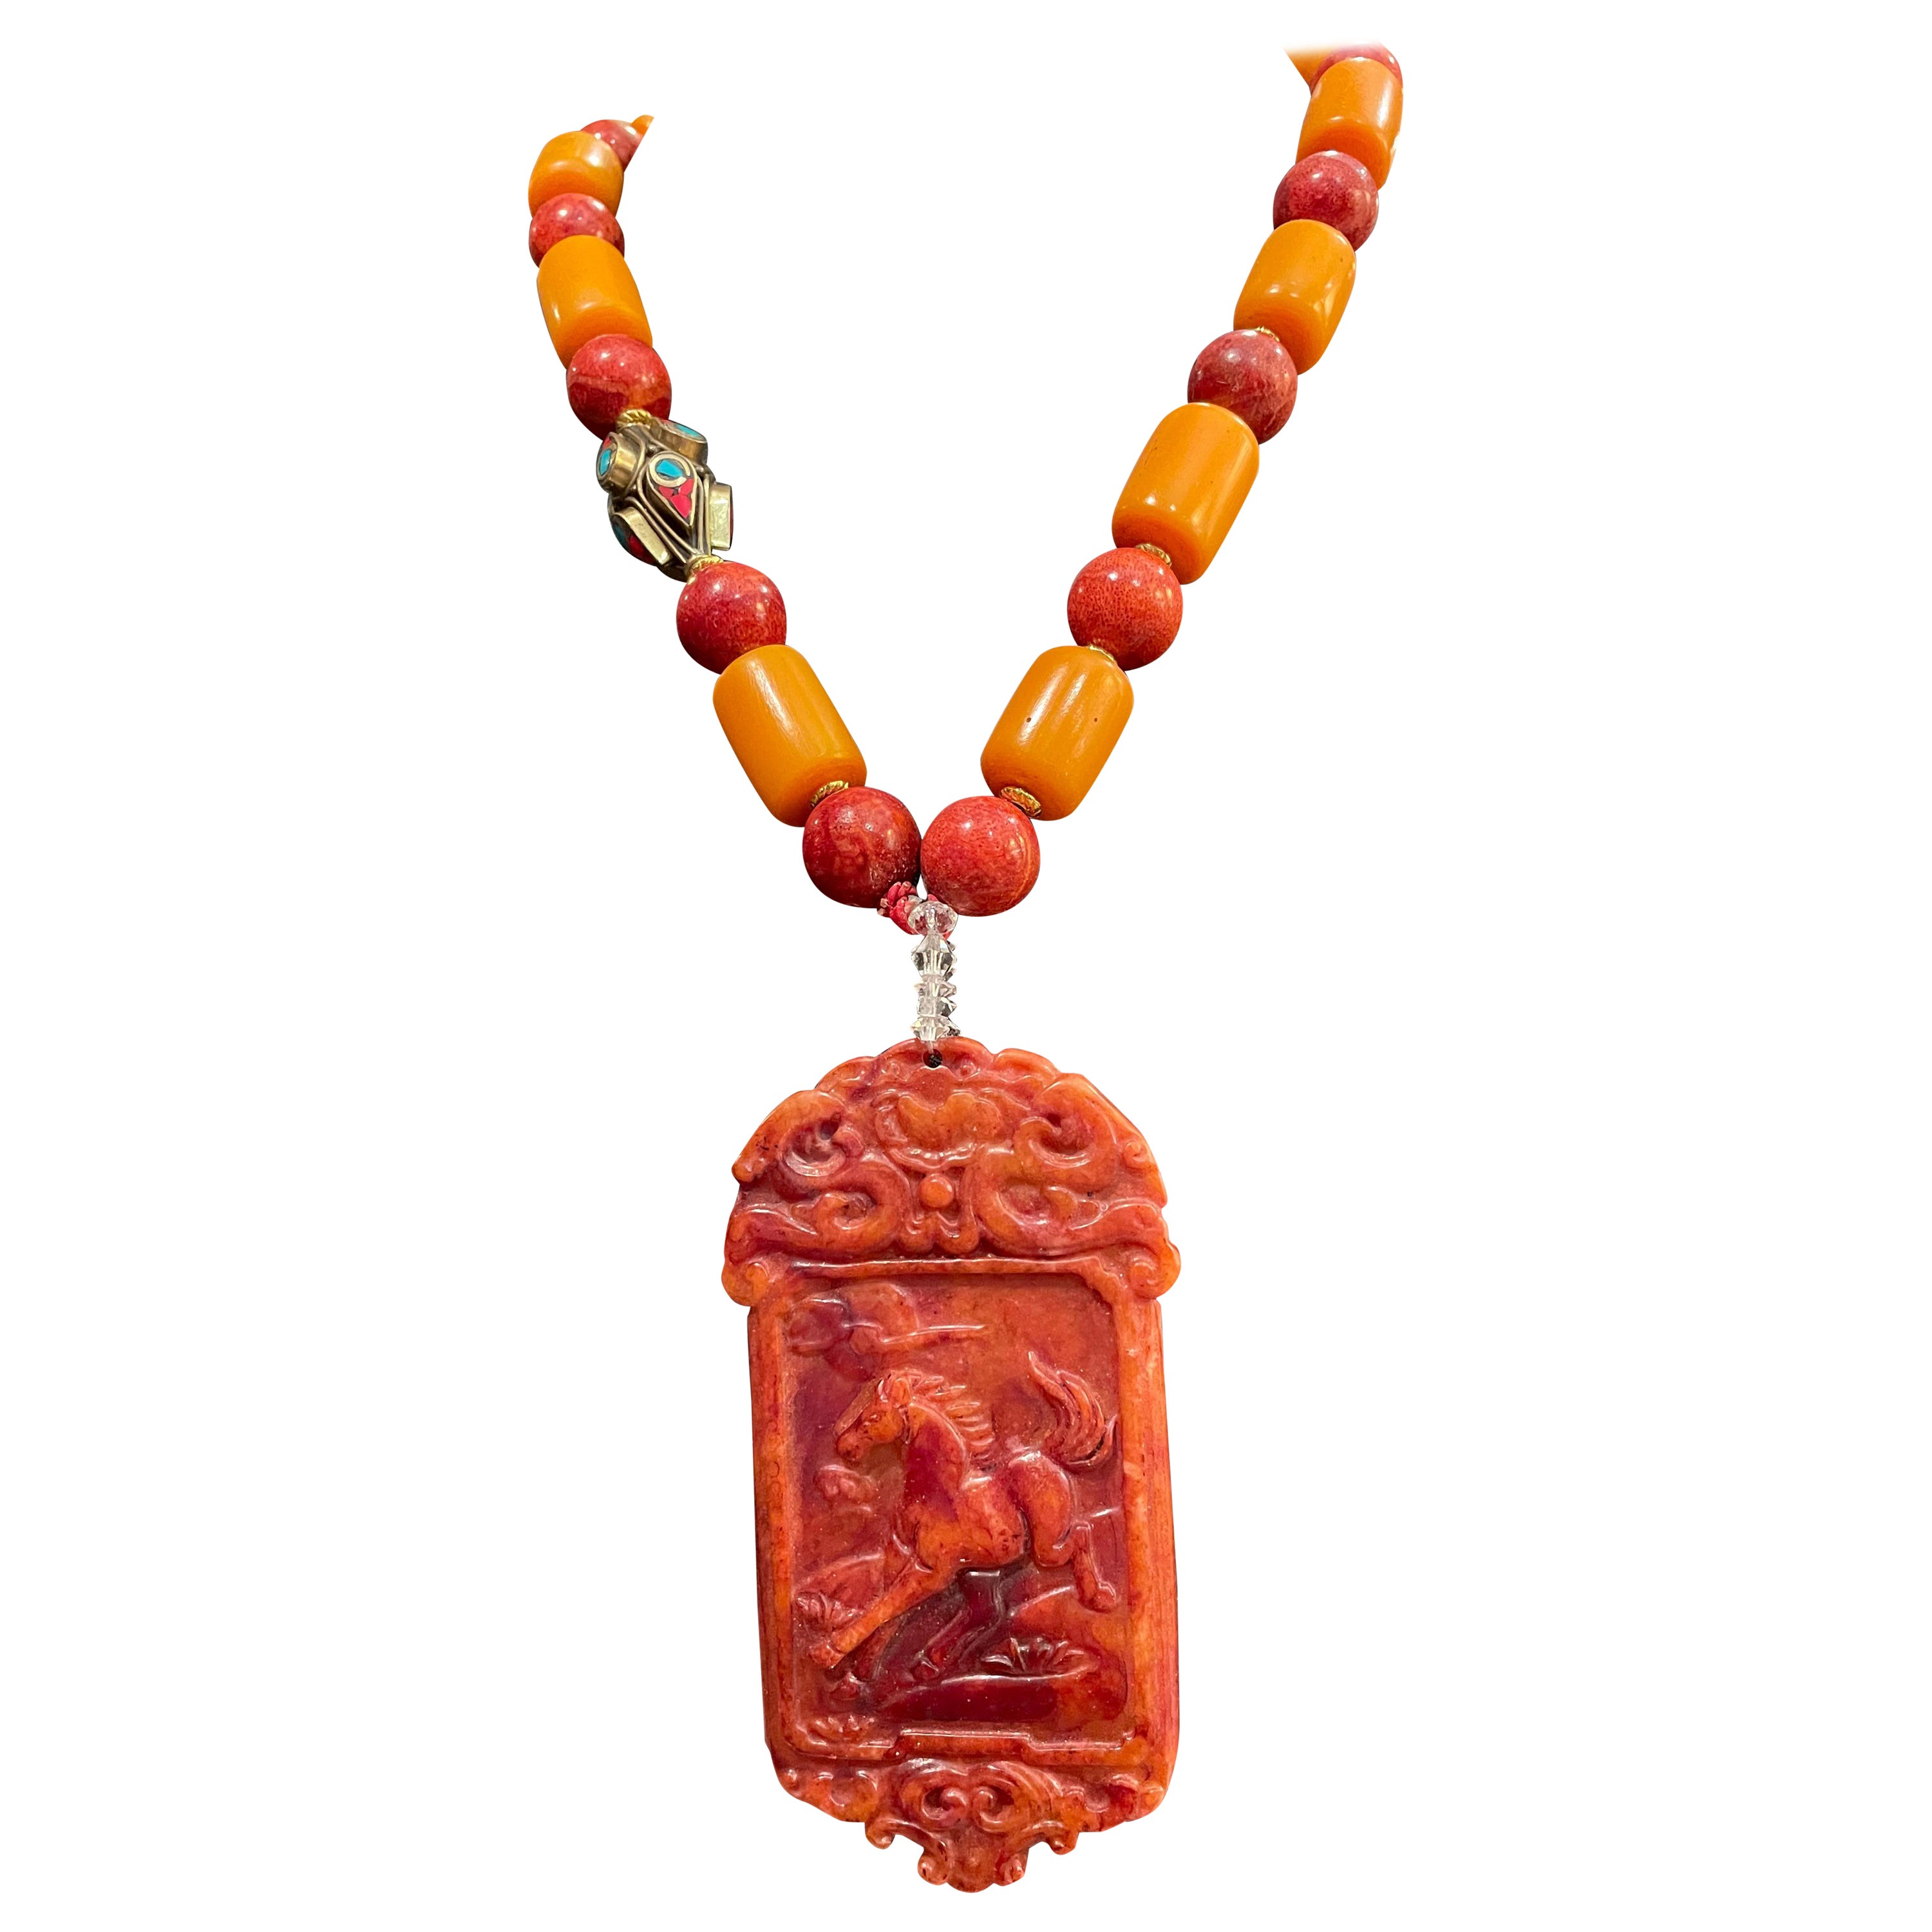 LB Chinese soapstone carved pendant necklace Chinese coral Bakelite Tibet brass For Sale